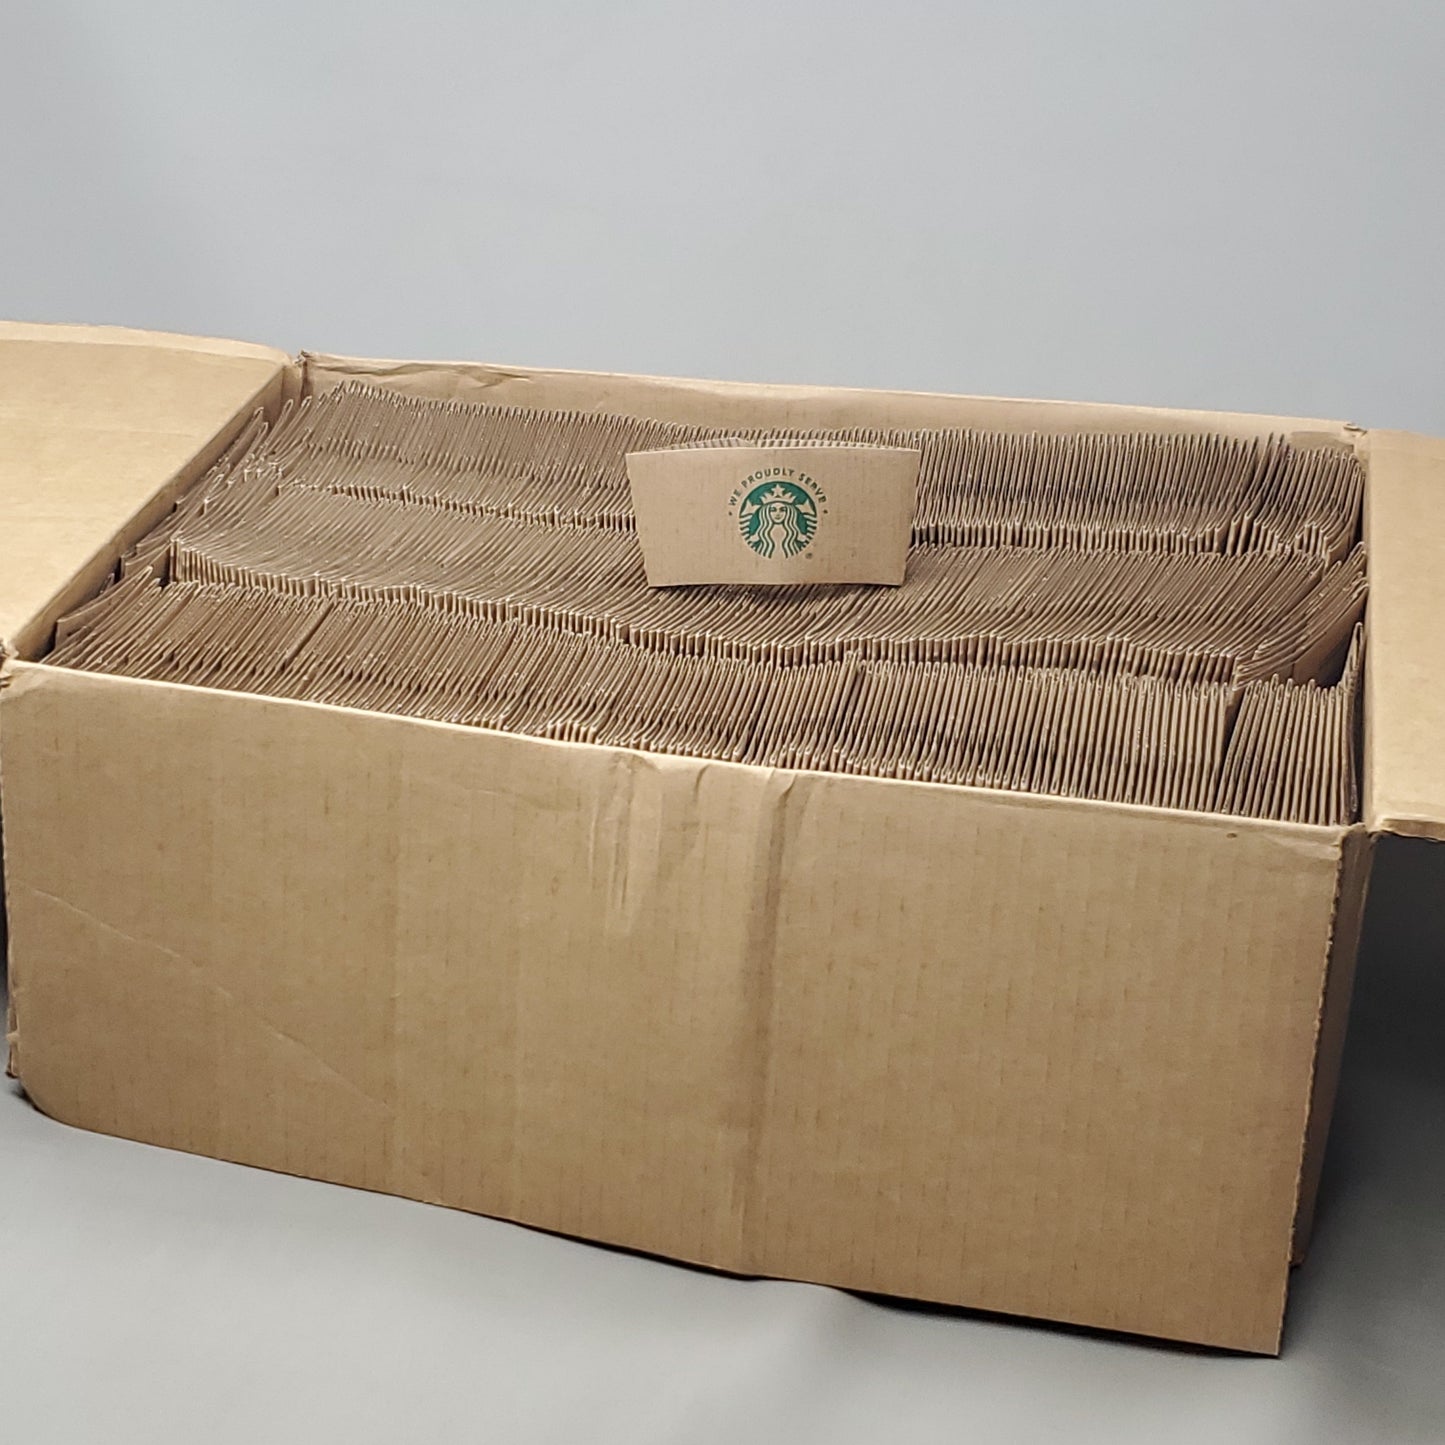 (1,380 PACK) STARBUCKS Hot Cup Sleeves for 12 - 20 oz Cups 11020575 (New)